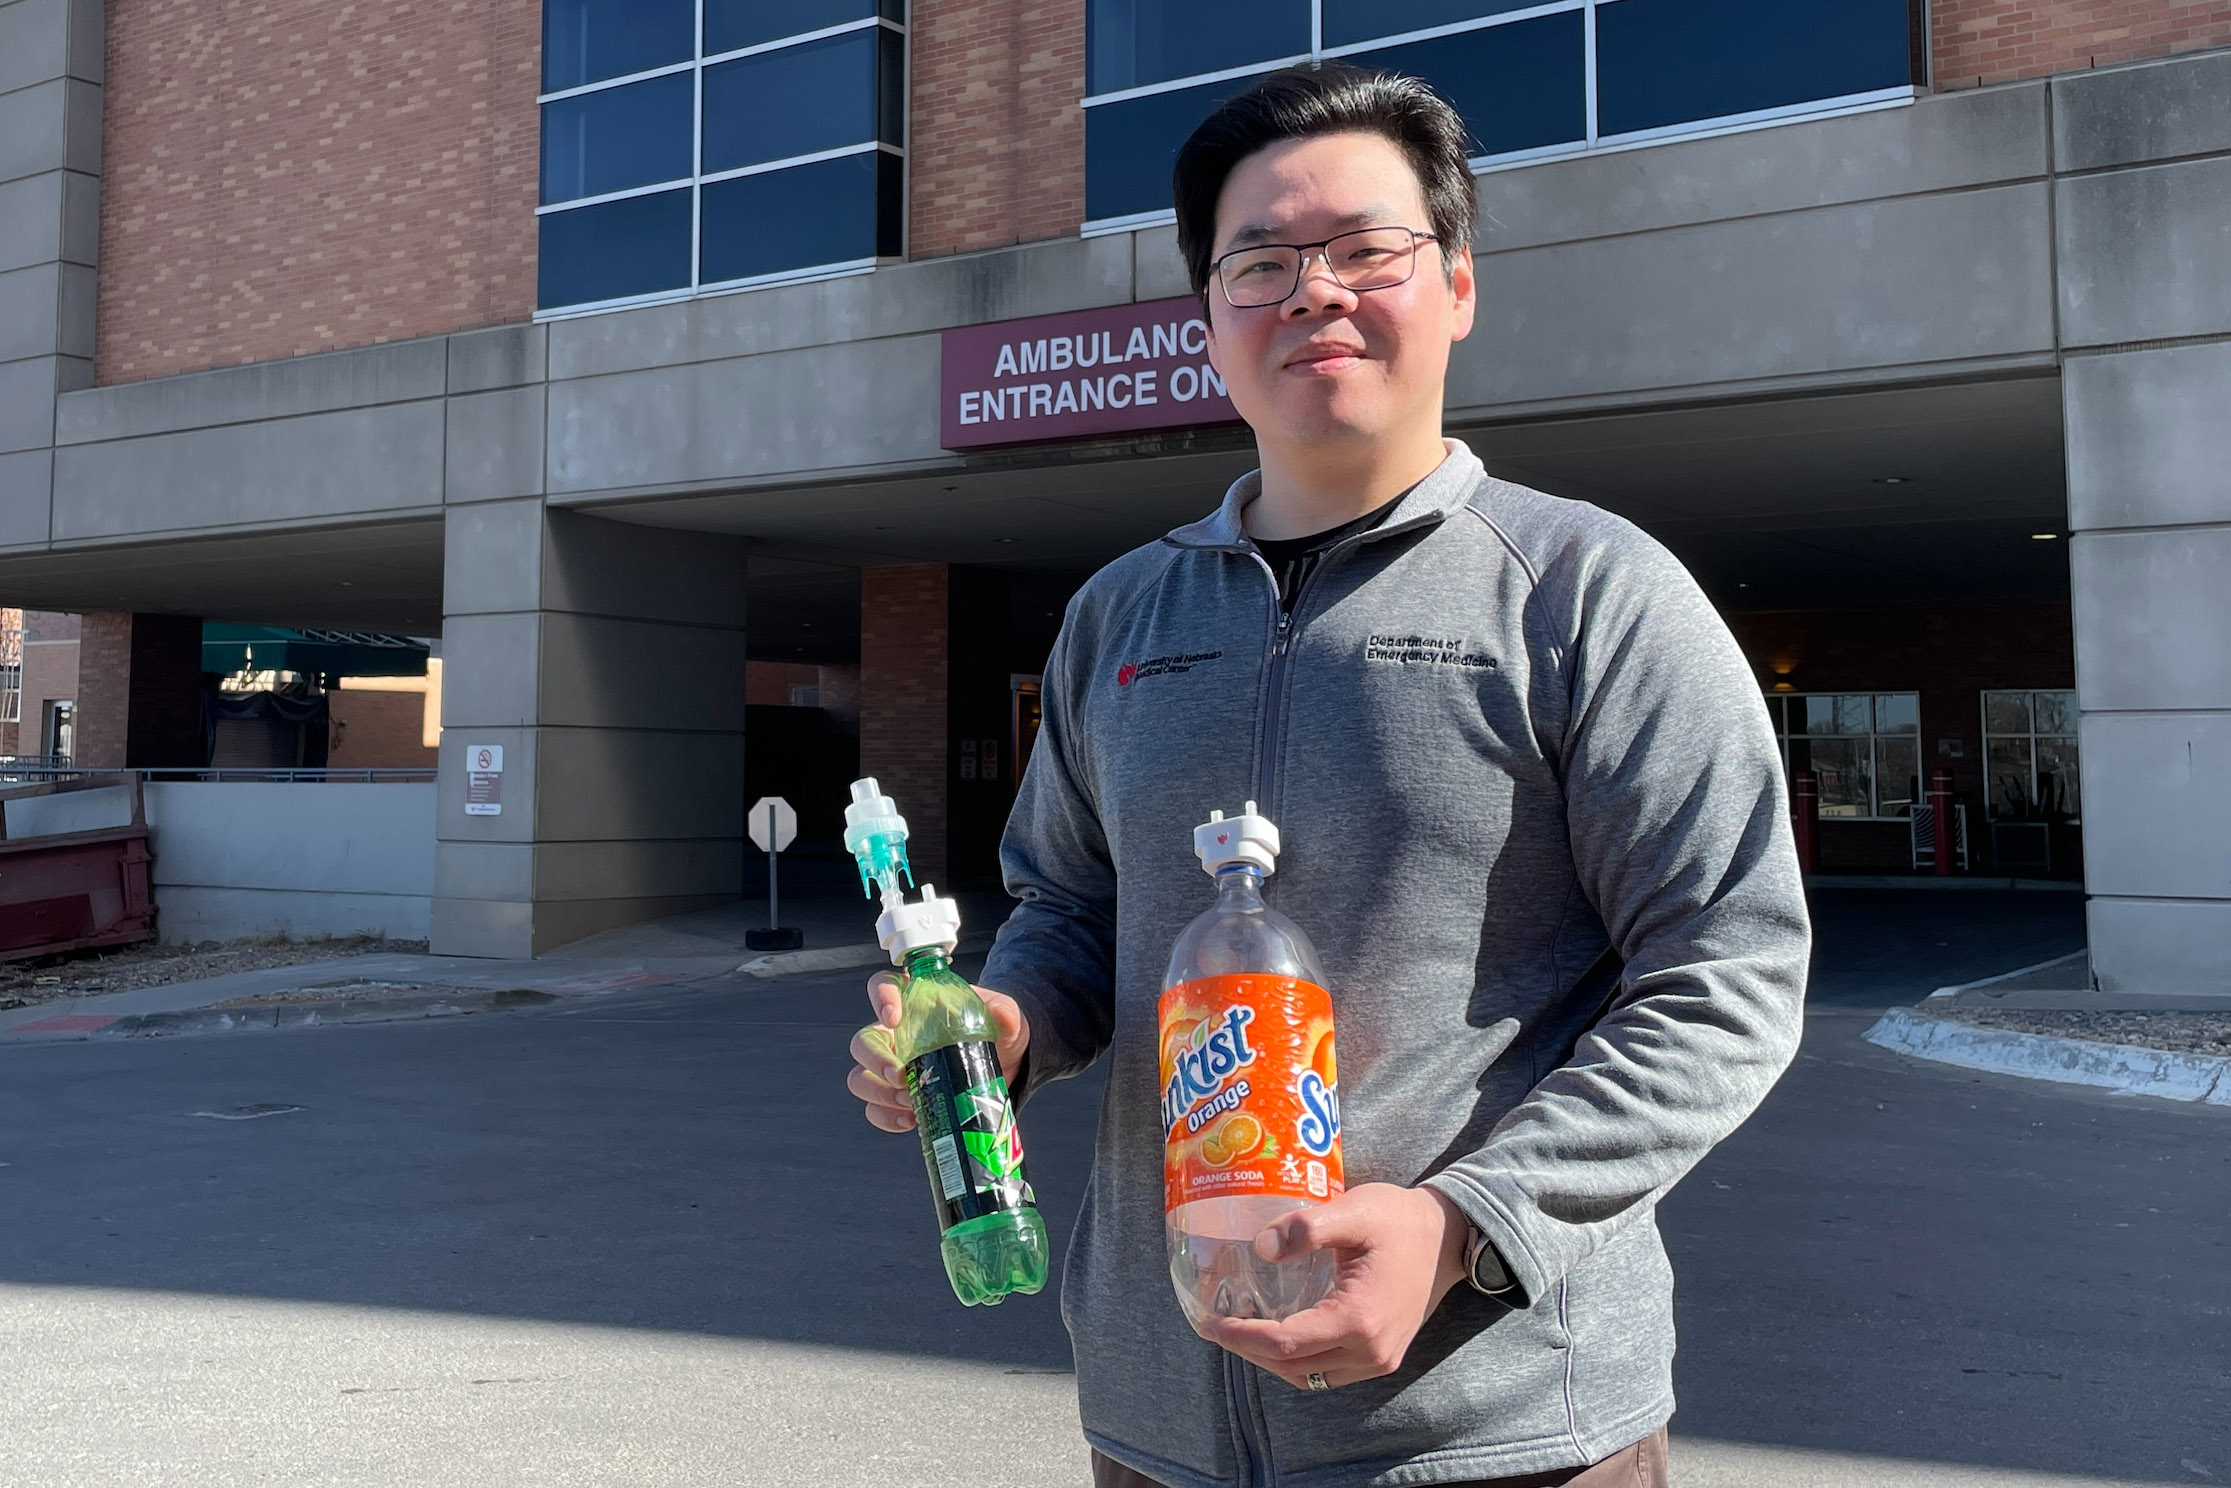 Thang Nguyen&comma; PhD&comma; used the MakERLab located in the emergency department to collaborate with colleagues to create a medication aerosolizing device that can be used with a plastic soda bottle&period; The device&comma; called Project FreeAir&comma; was developed with funding by the UNMC Eugene Kenney Memorial Fund and is available free to the public&period;